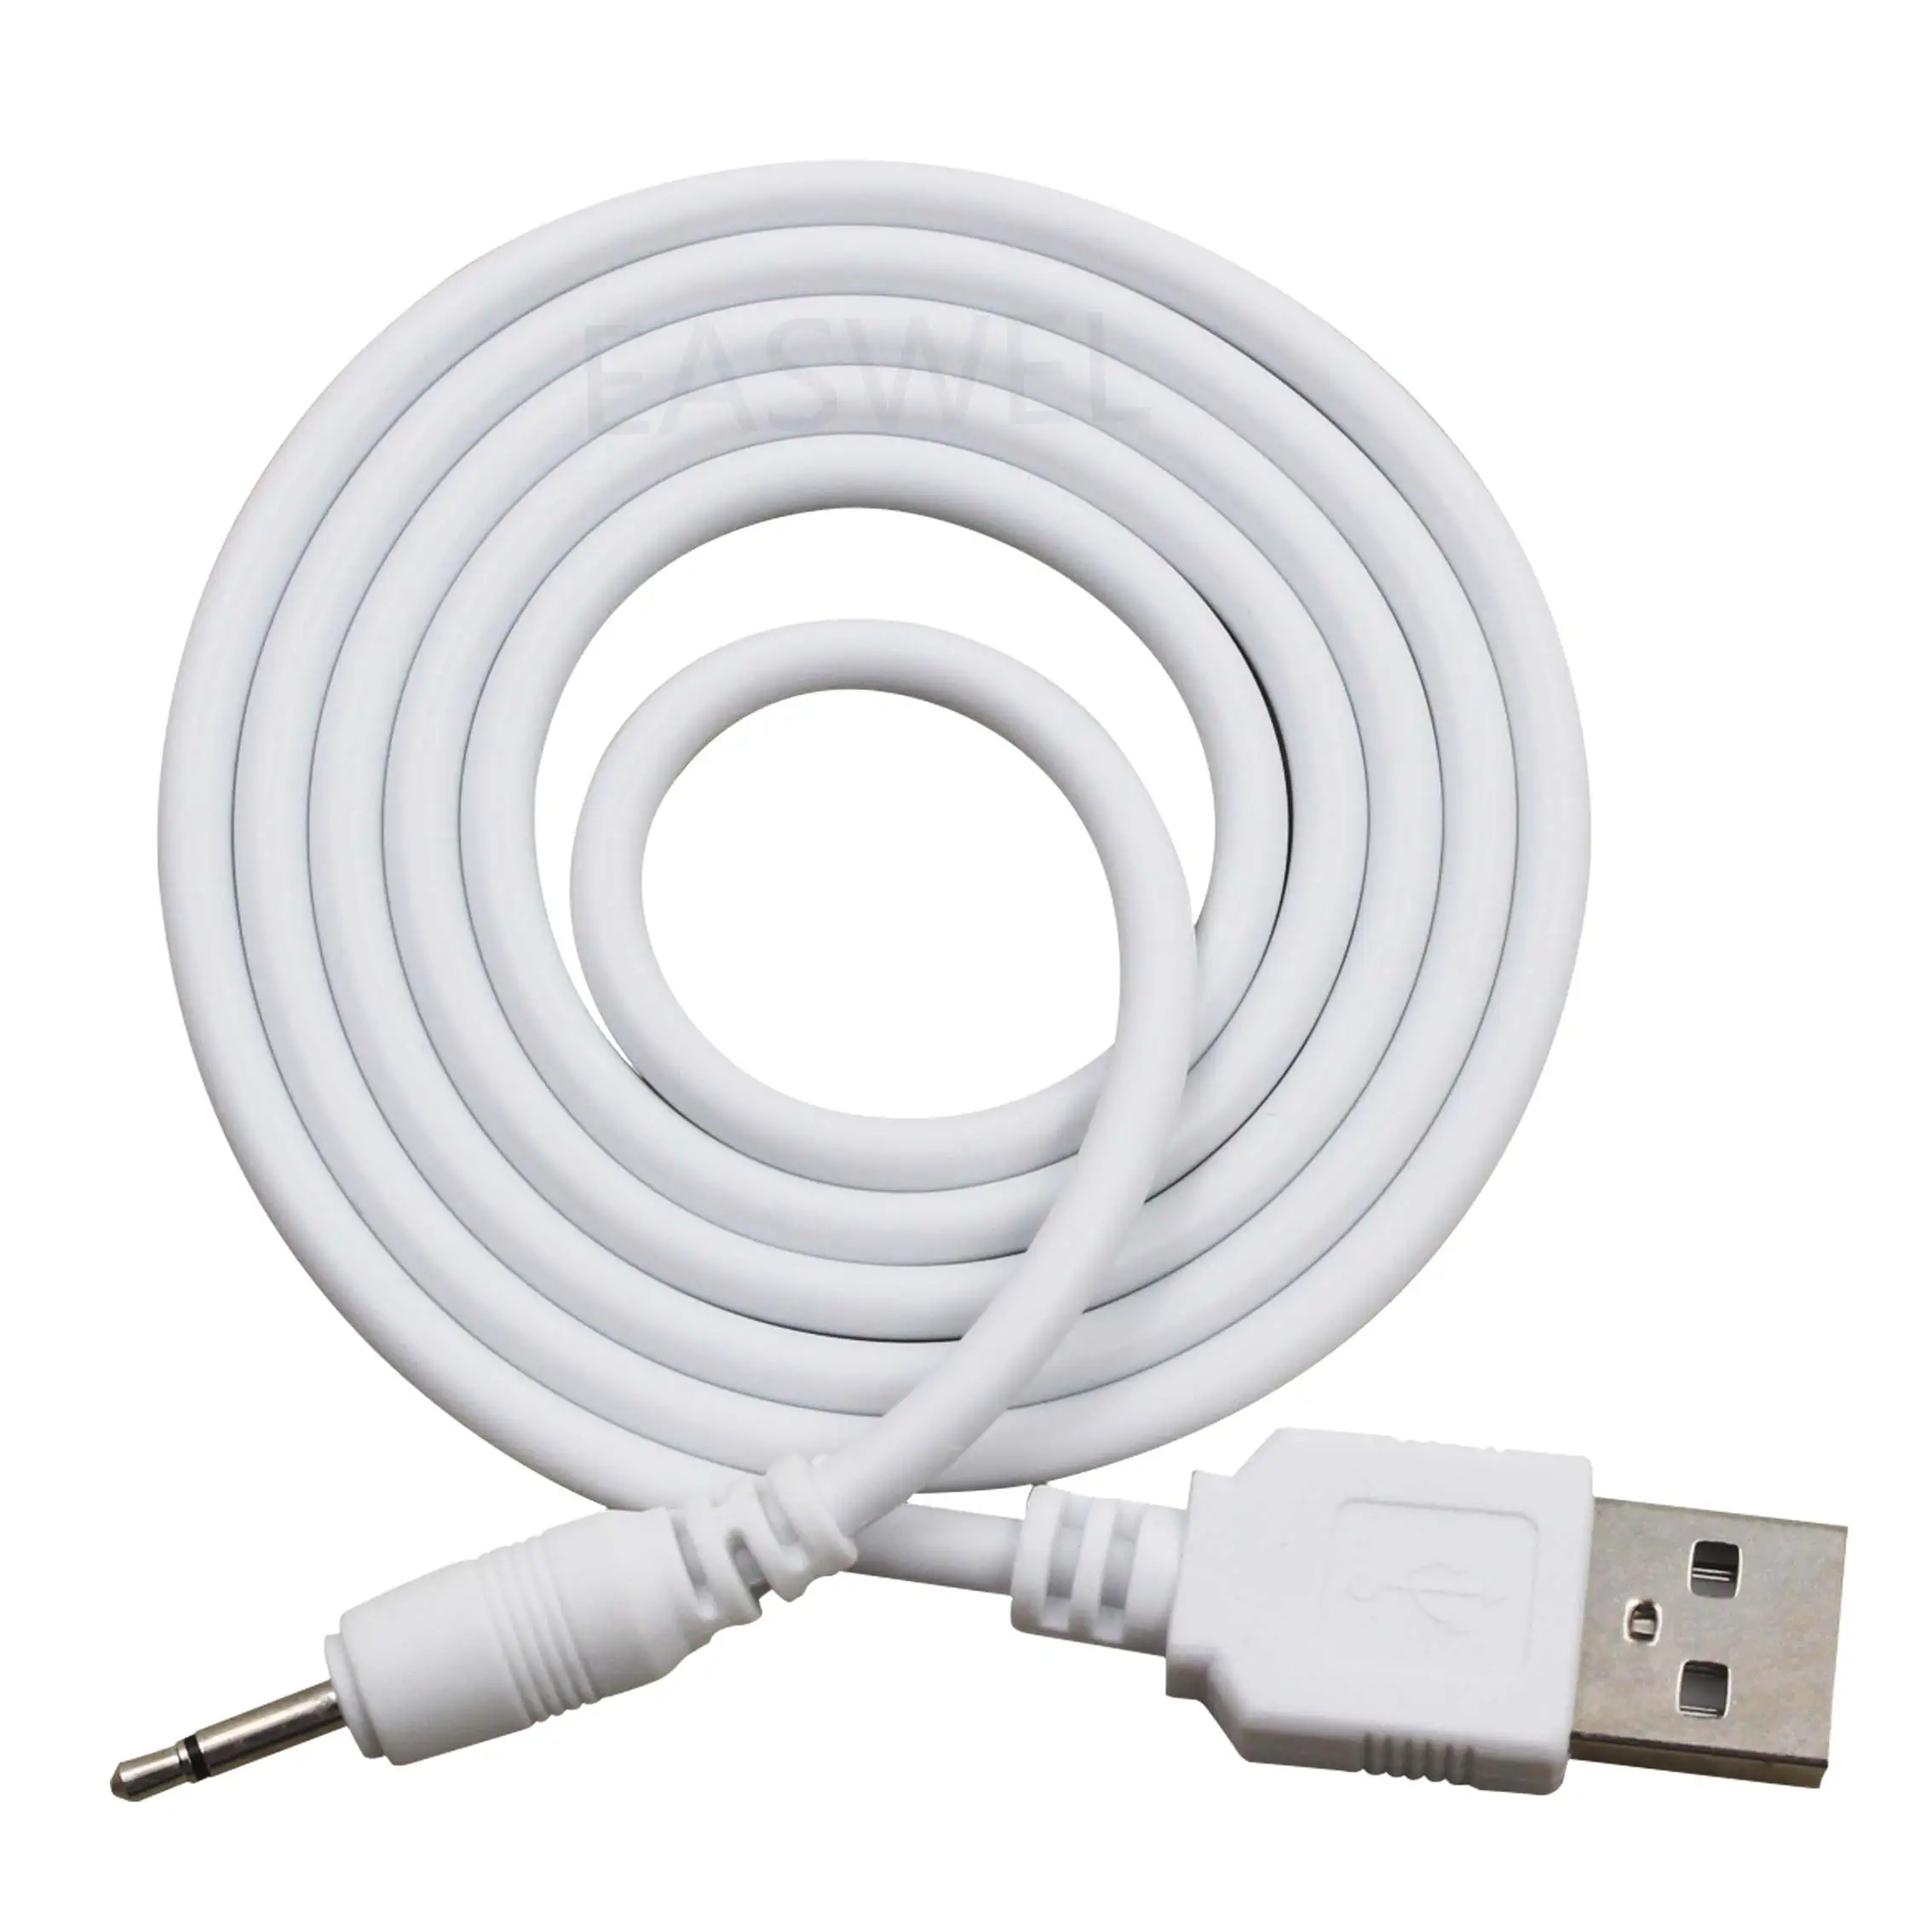 USB DC Power Adapter Charger Cable Cord For Shibari Deluxe Mega Wand Massager 